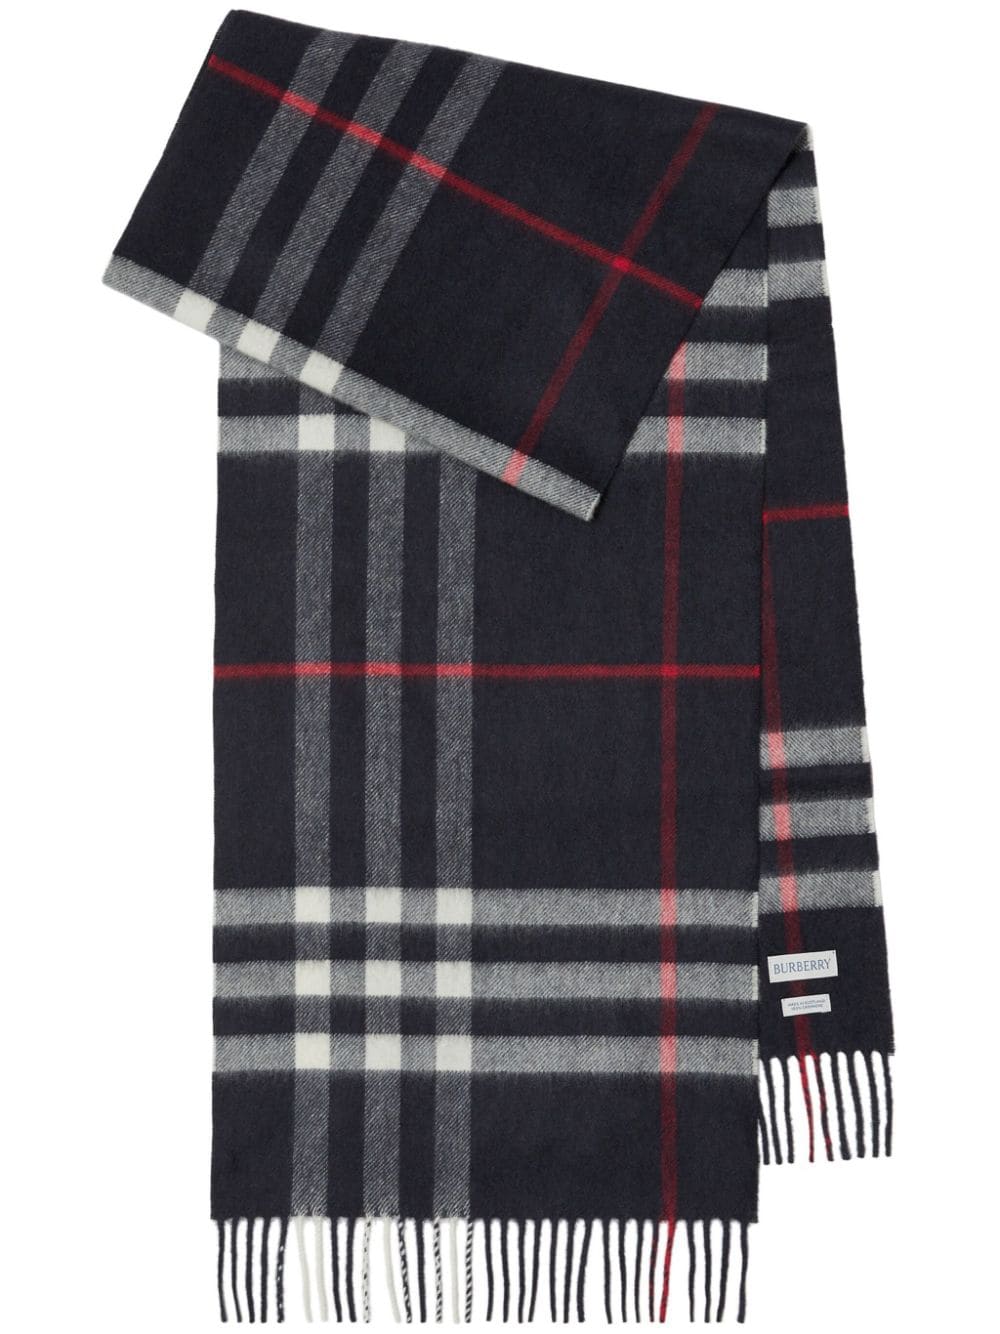 Burberry fringed check cashmere scarf